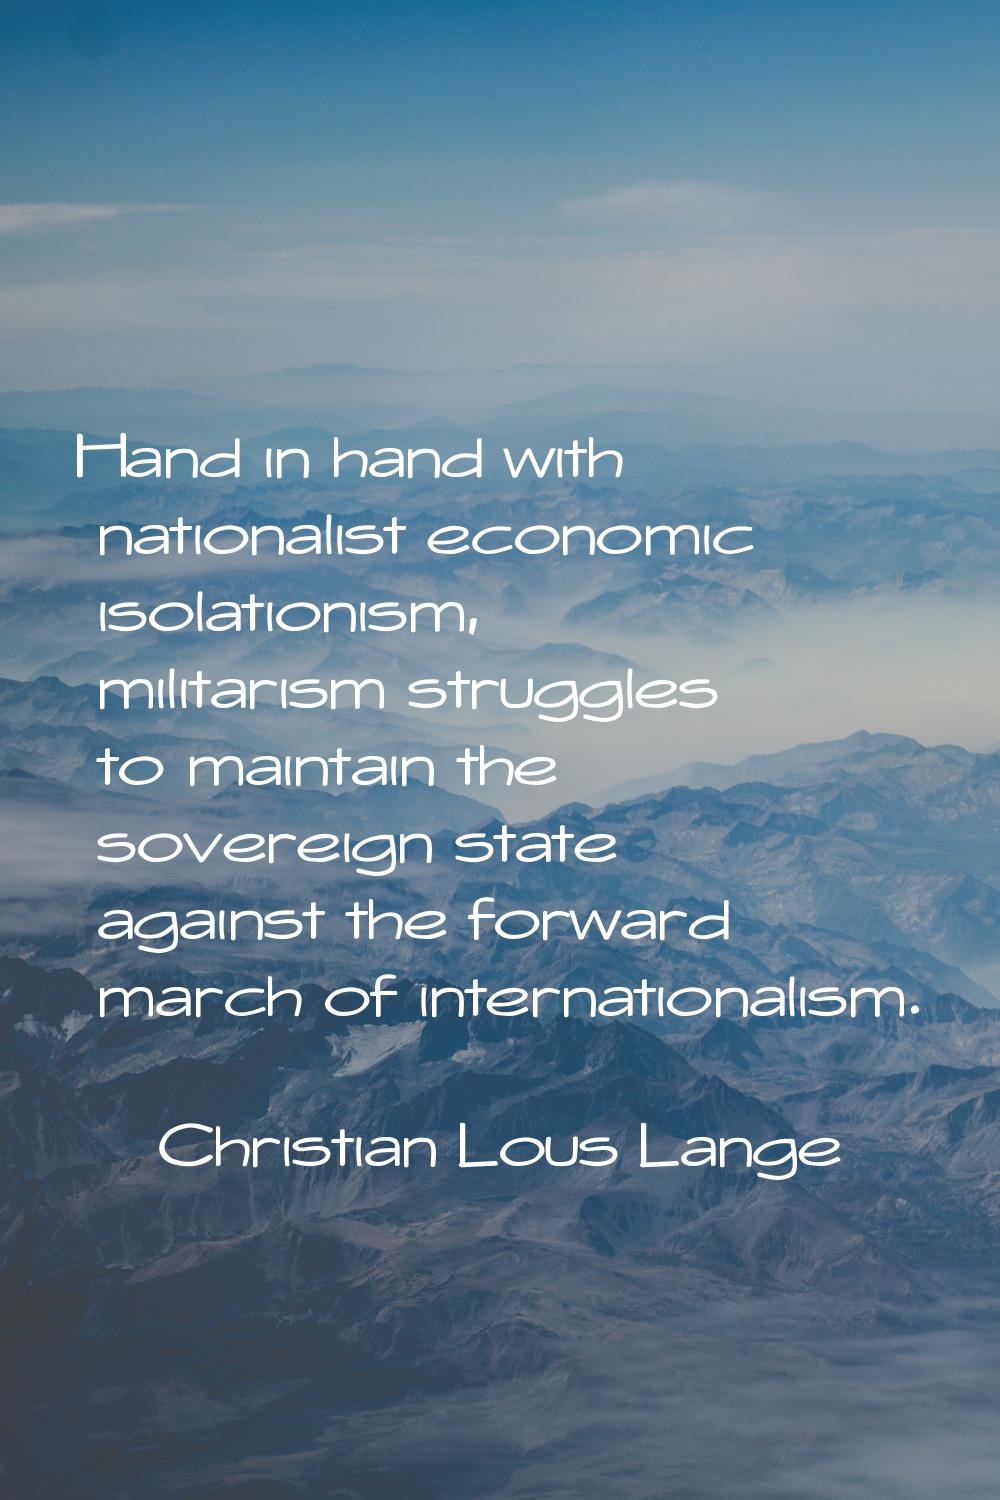 Hand in hand with nationalist economic isolationism, militarism struggles to maintain the sovereign